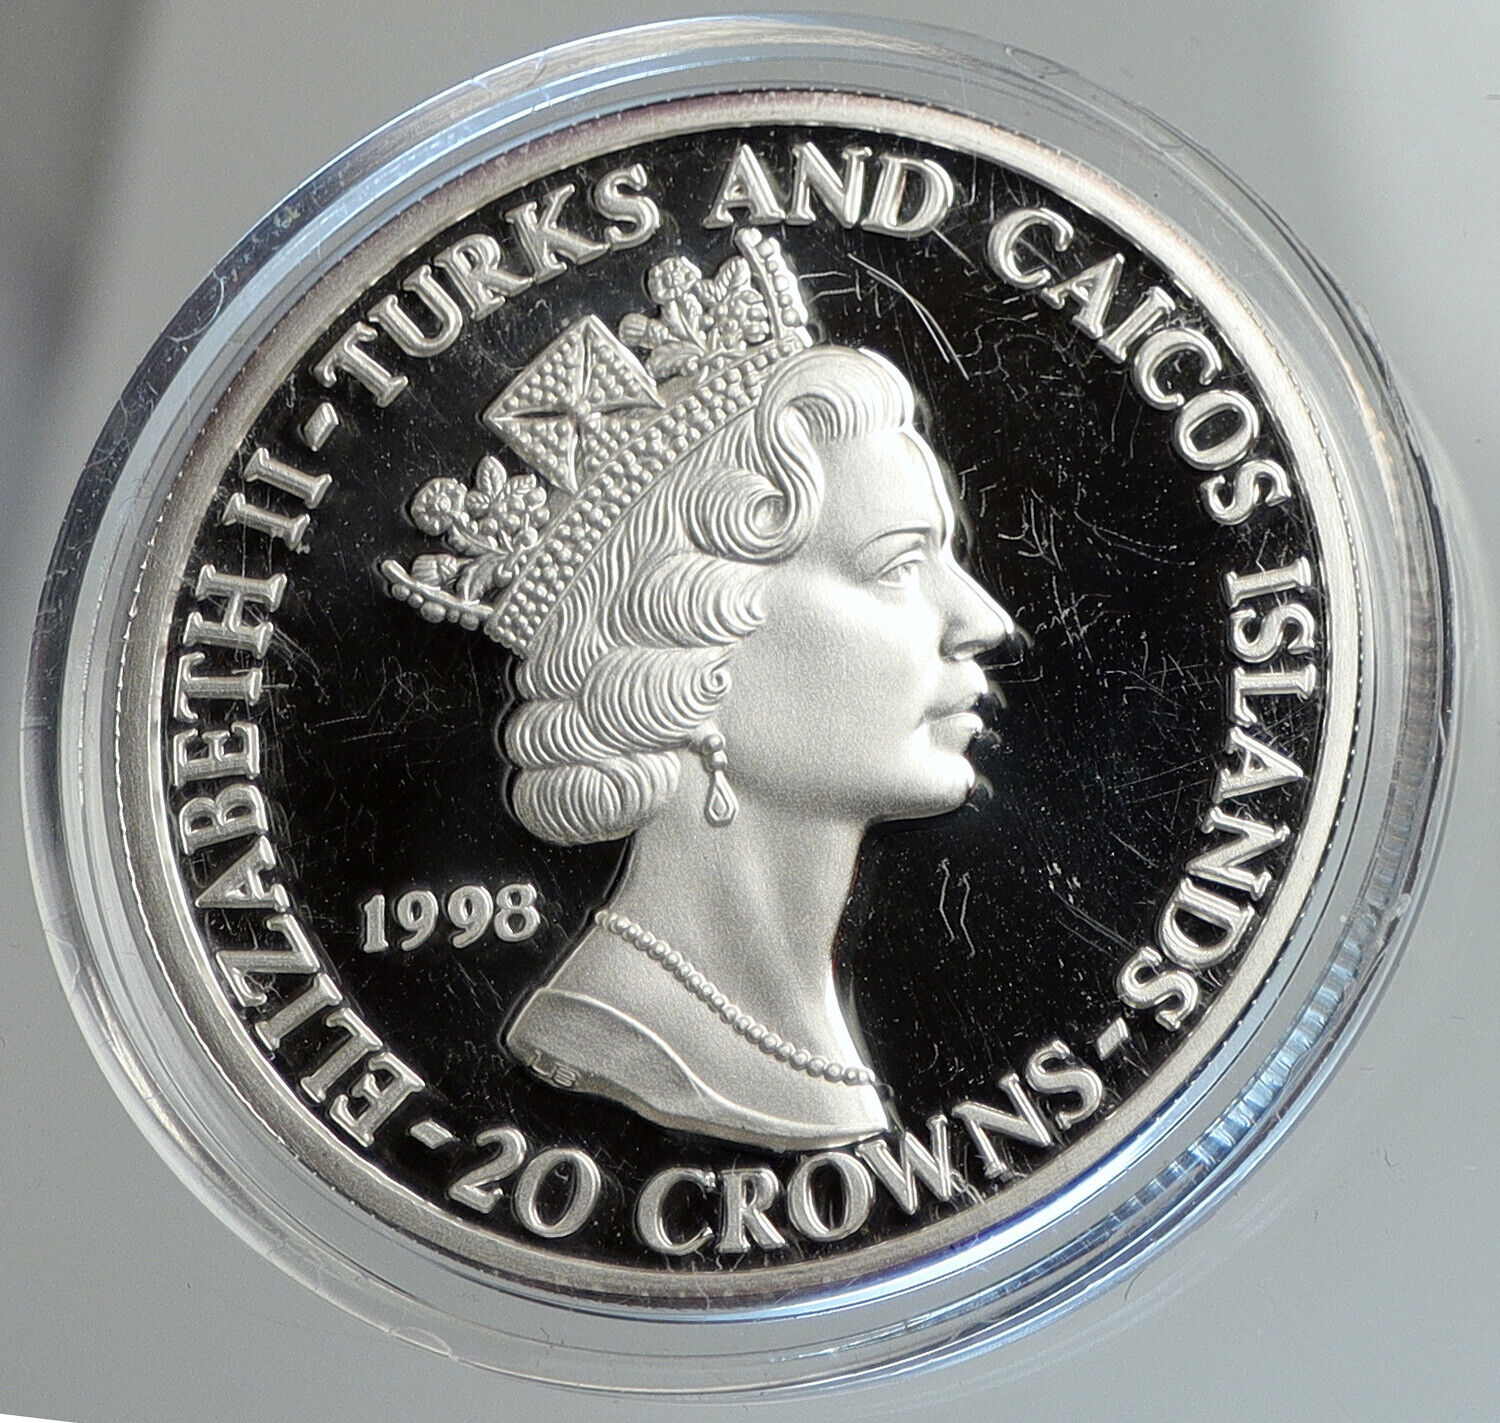 1998 TURKS & CAICOS Lancaster ROYAL AIR FORCE Proof Silver 20 Crown Coin i112424